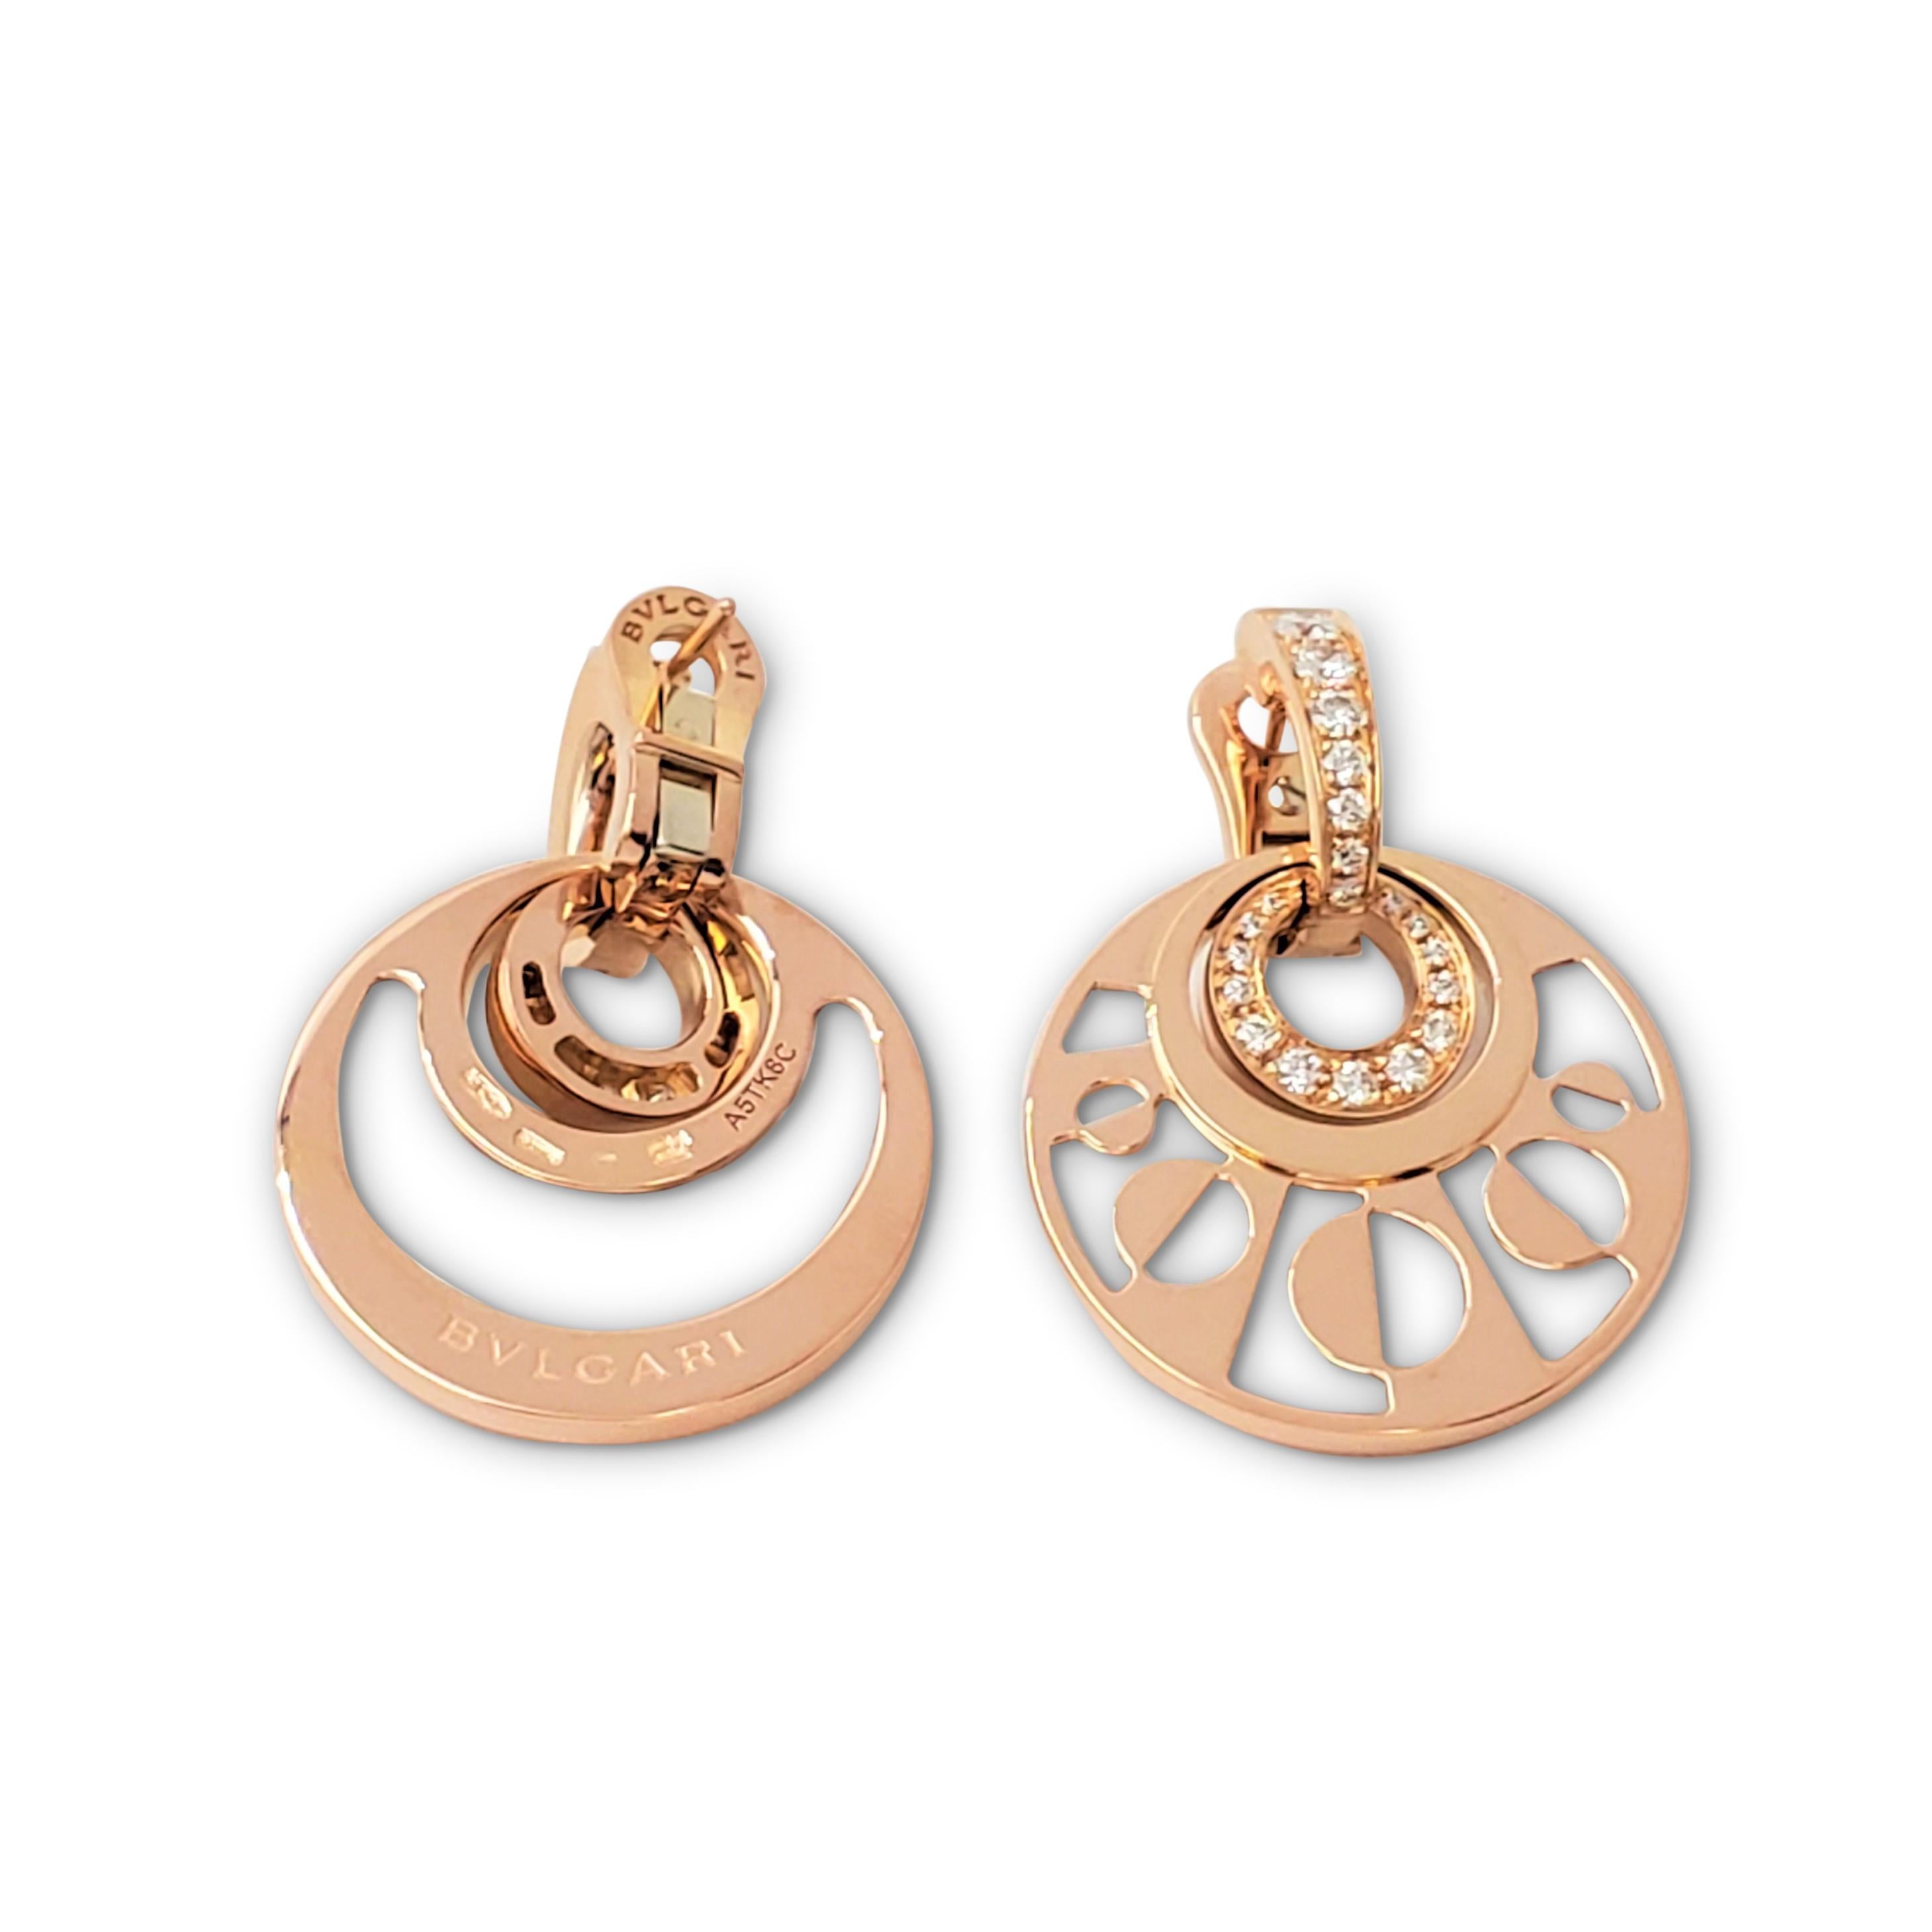 Round Cut Bvlgari 'Intarsio' Rose Gold Mother-of-Pearl and Diamond Pendant Earrings